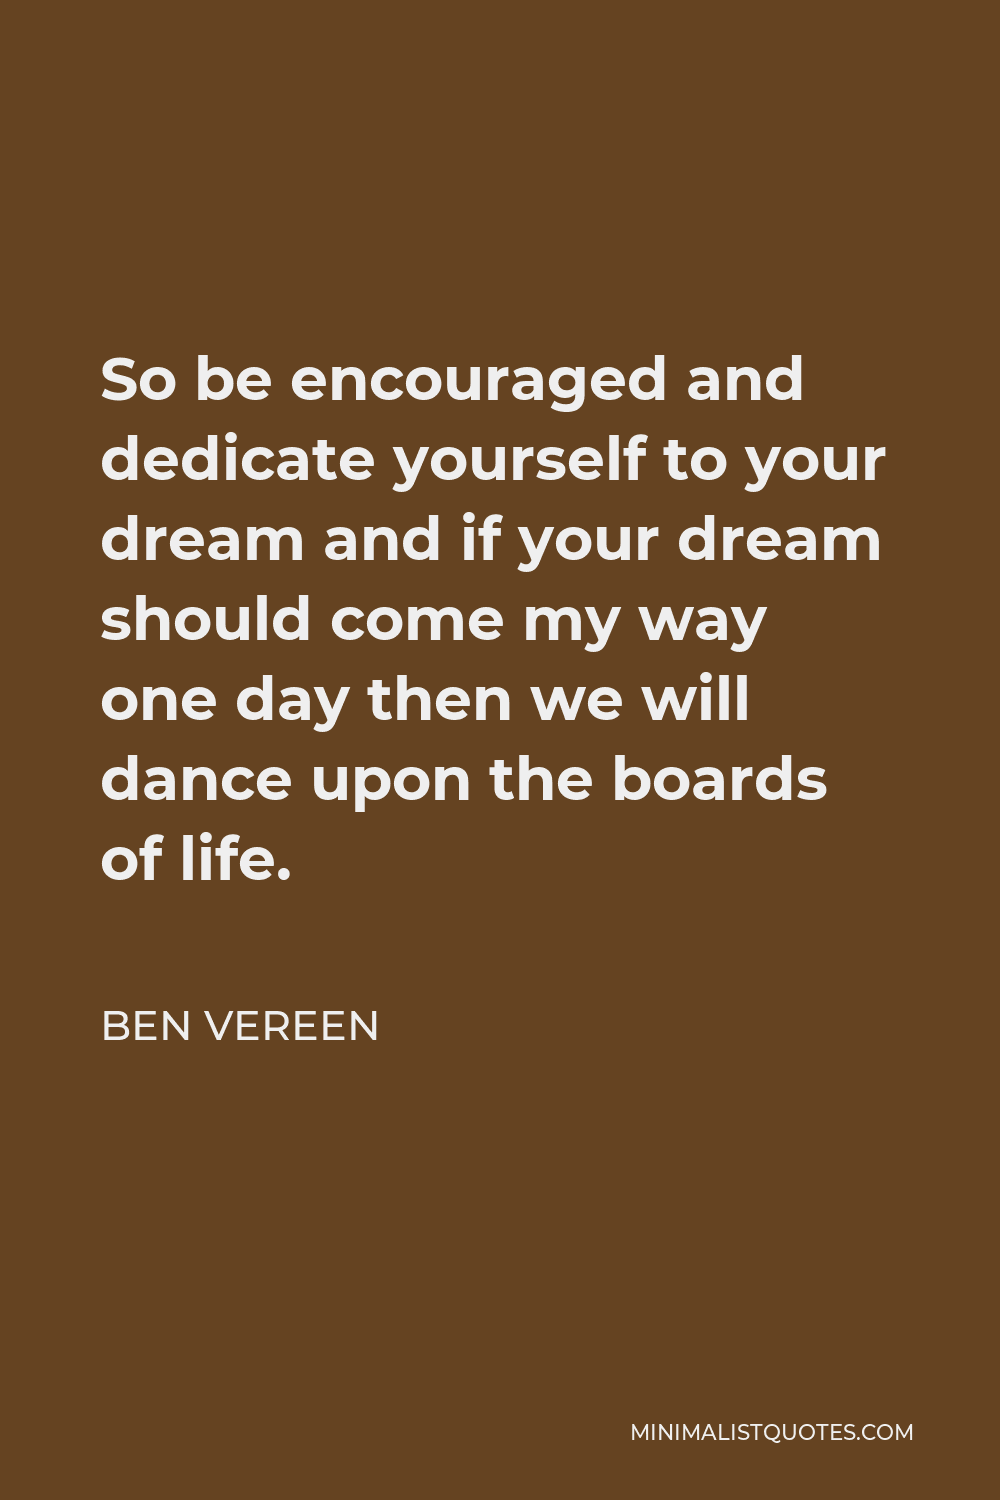 Ben Vereen Quote - So be encouraged and dedicate yourself to your dream and if your dream should come my way one day then we will dance upon the boards of life.